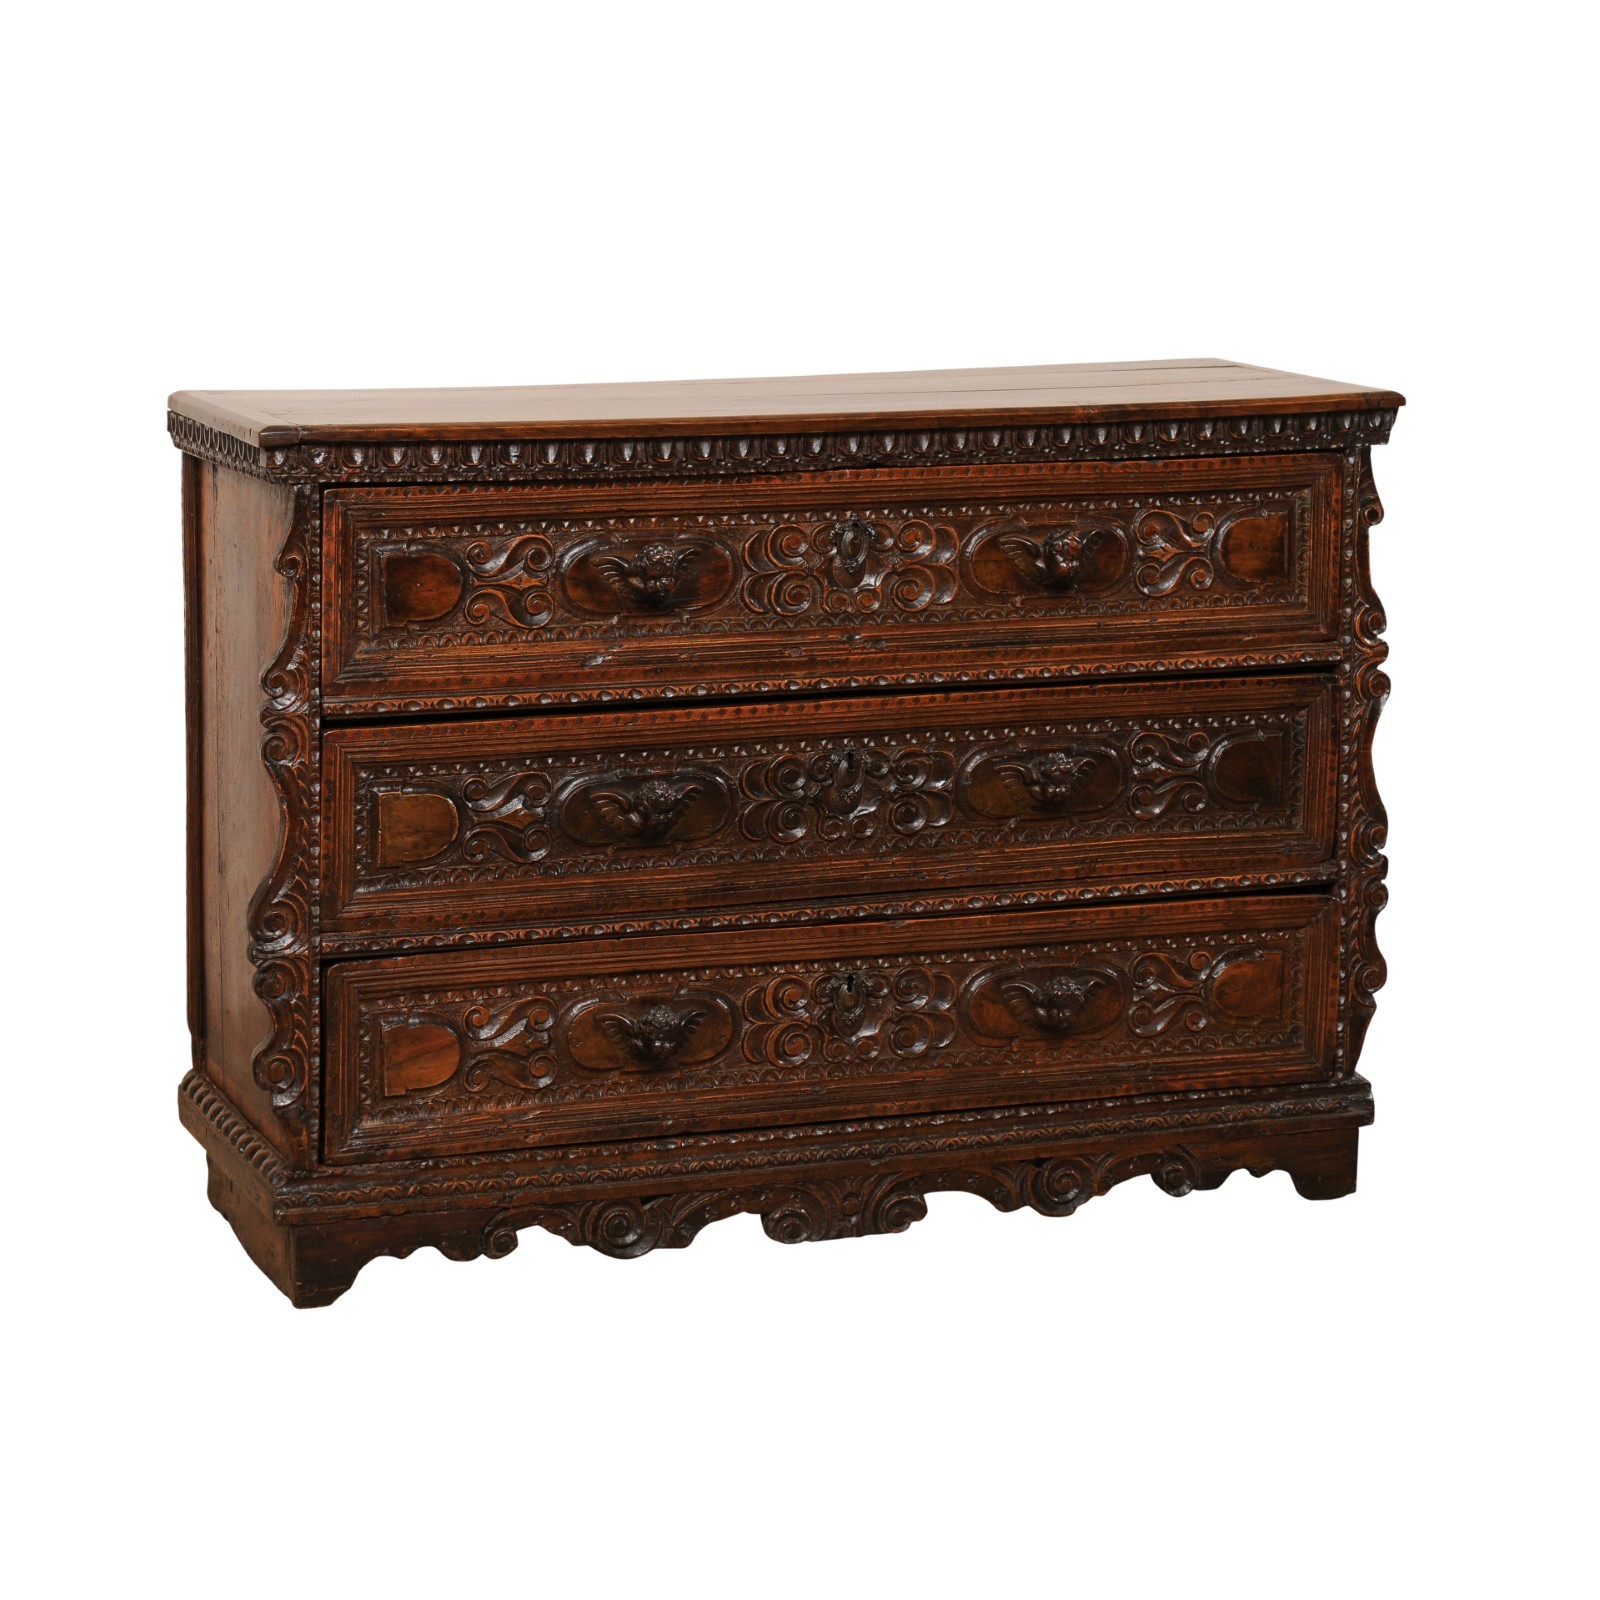 18th c Italian Commode w/Carved Putti Pulls